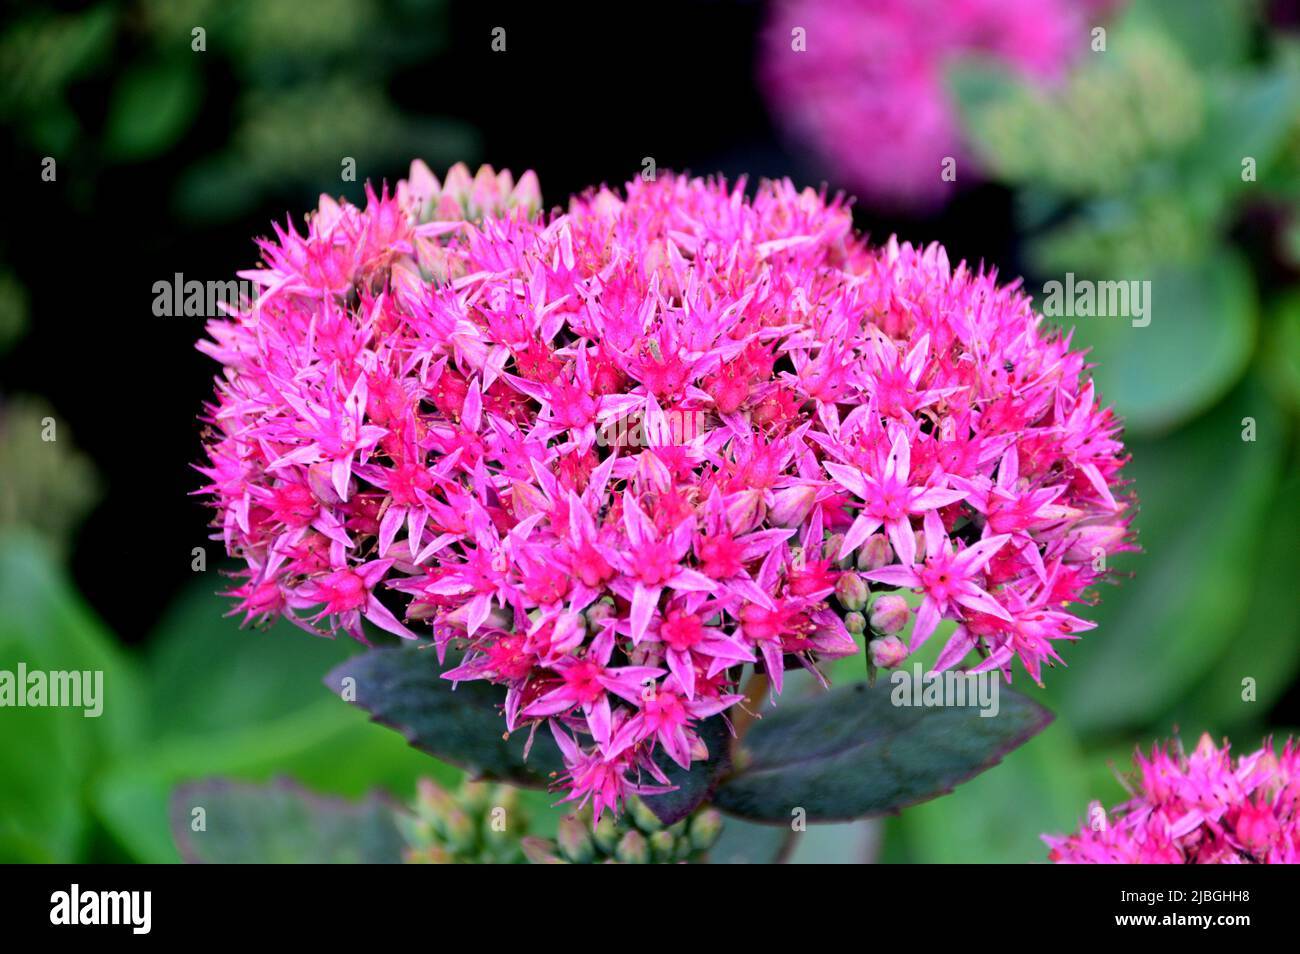 Single Clump of Pink Sedum (Hylotelephium spectabile) 'Carl' Flowers grown in a Border at RHS Garden Harlow Carr, Harrogate, Yorkshire, England, UK. Stock Photo